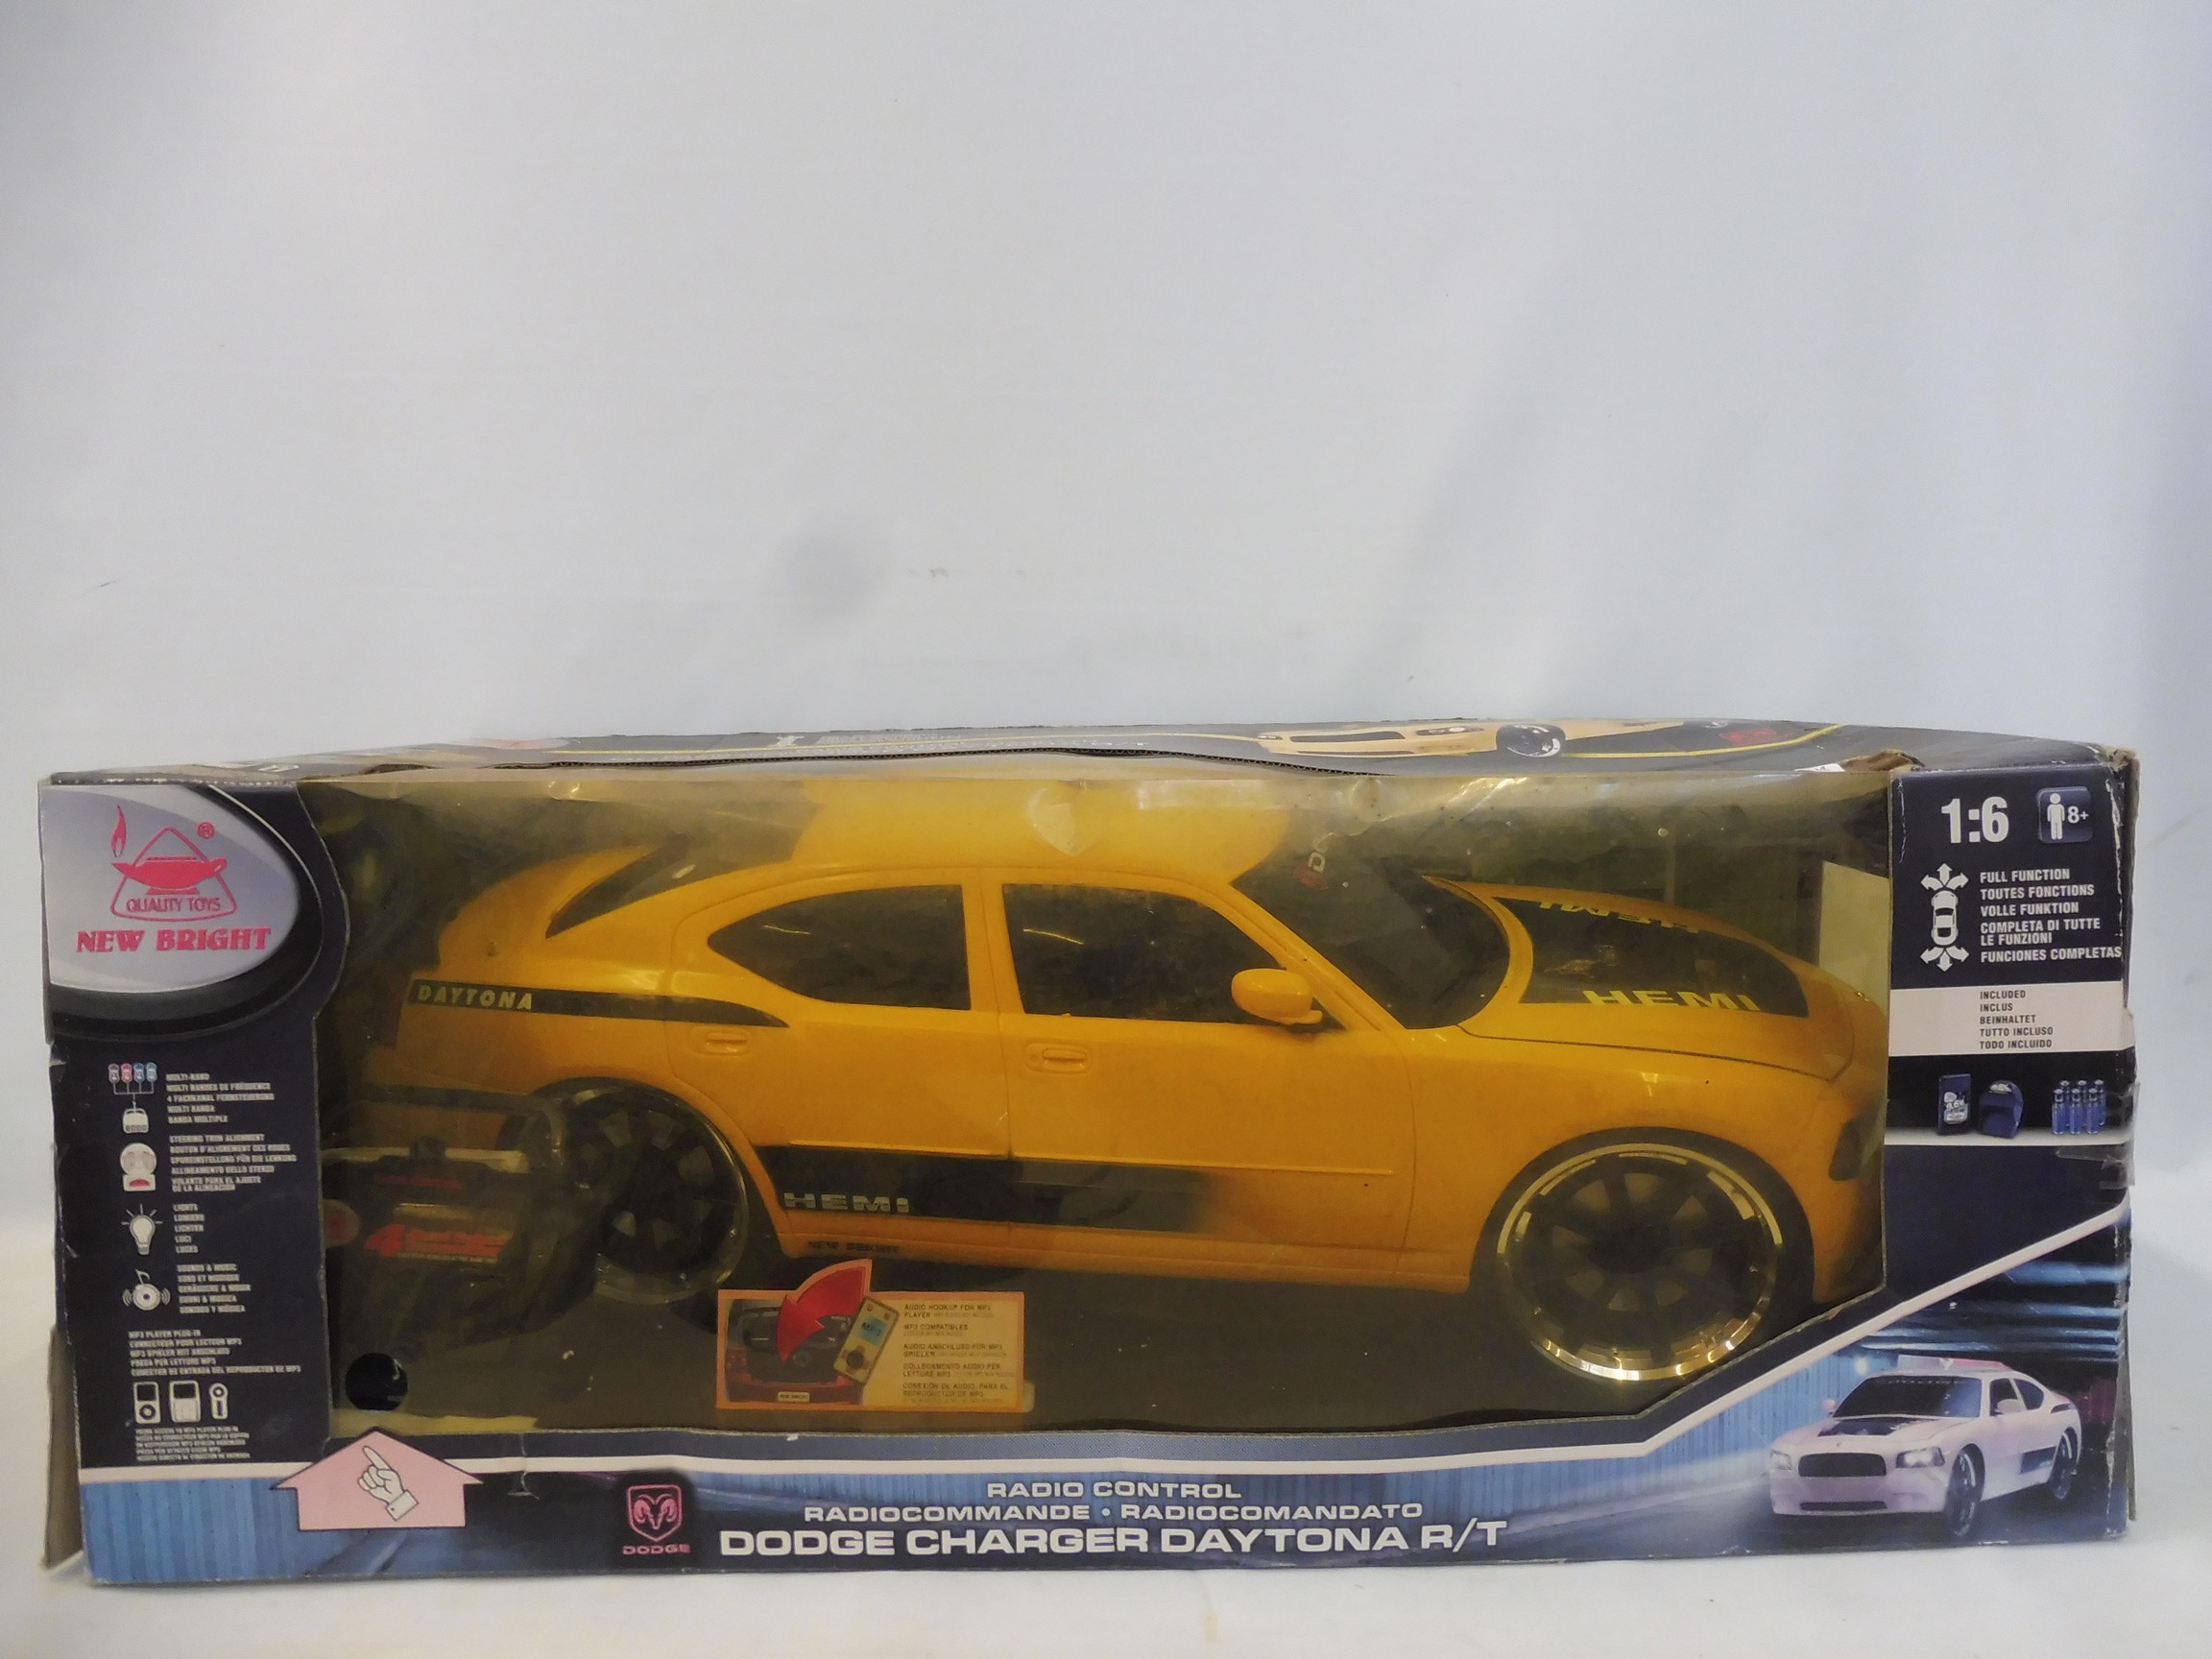 A large scale 1:6 scale radio controlled Dodge Charger Daytona.